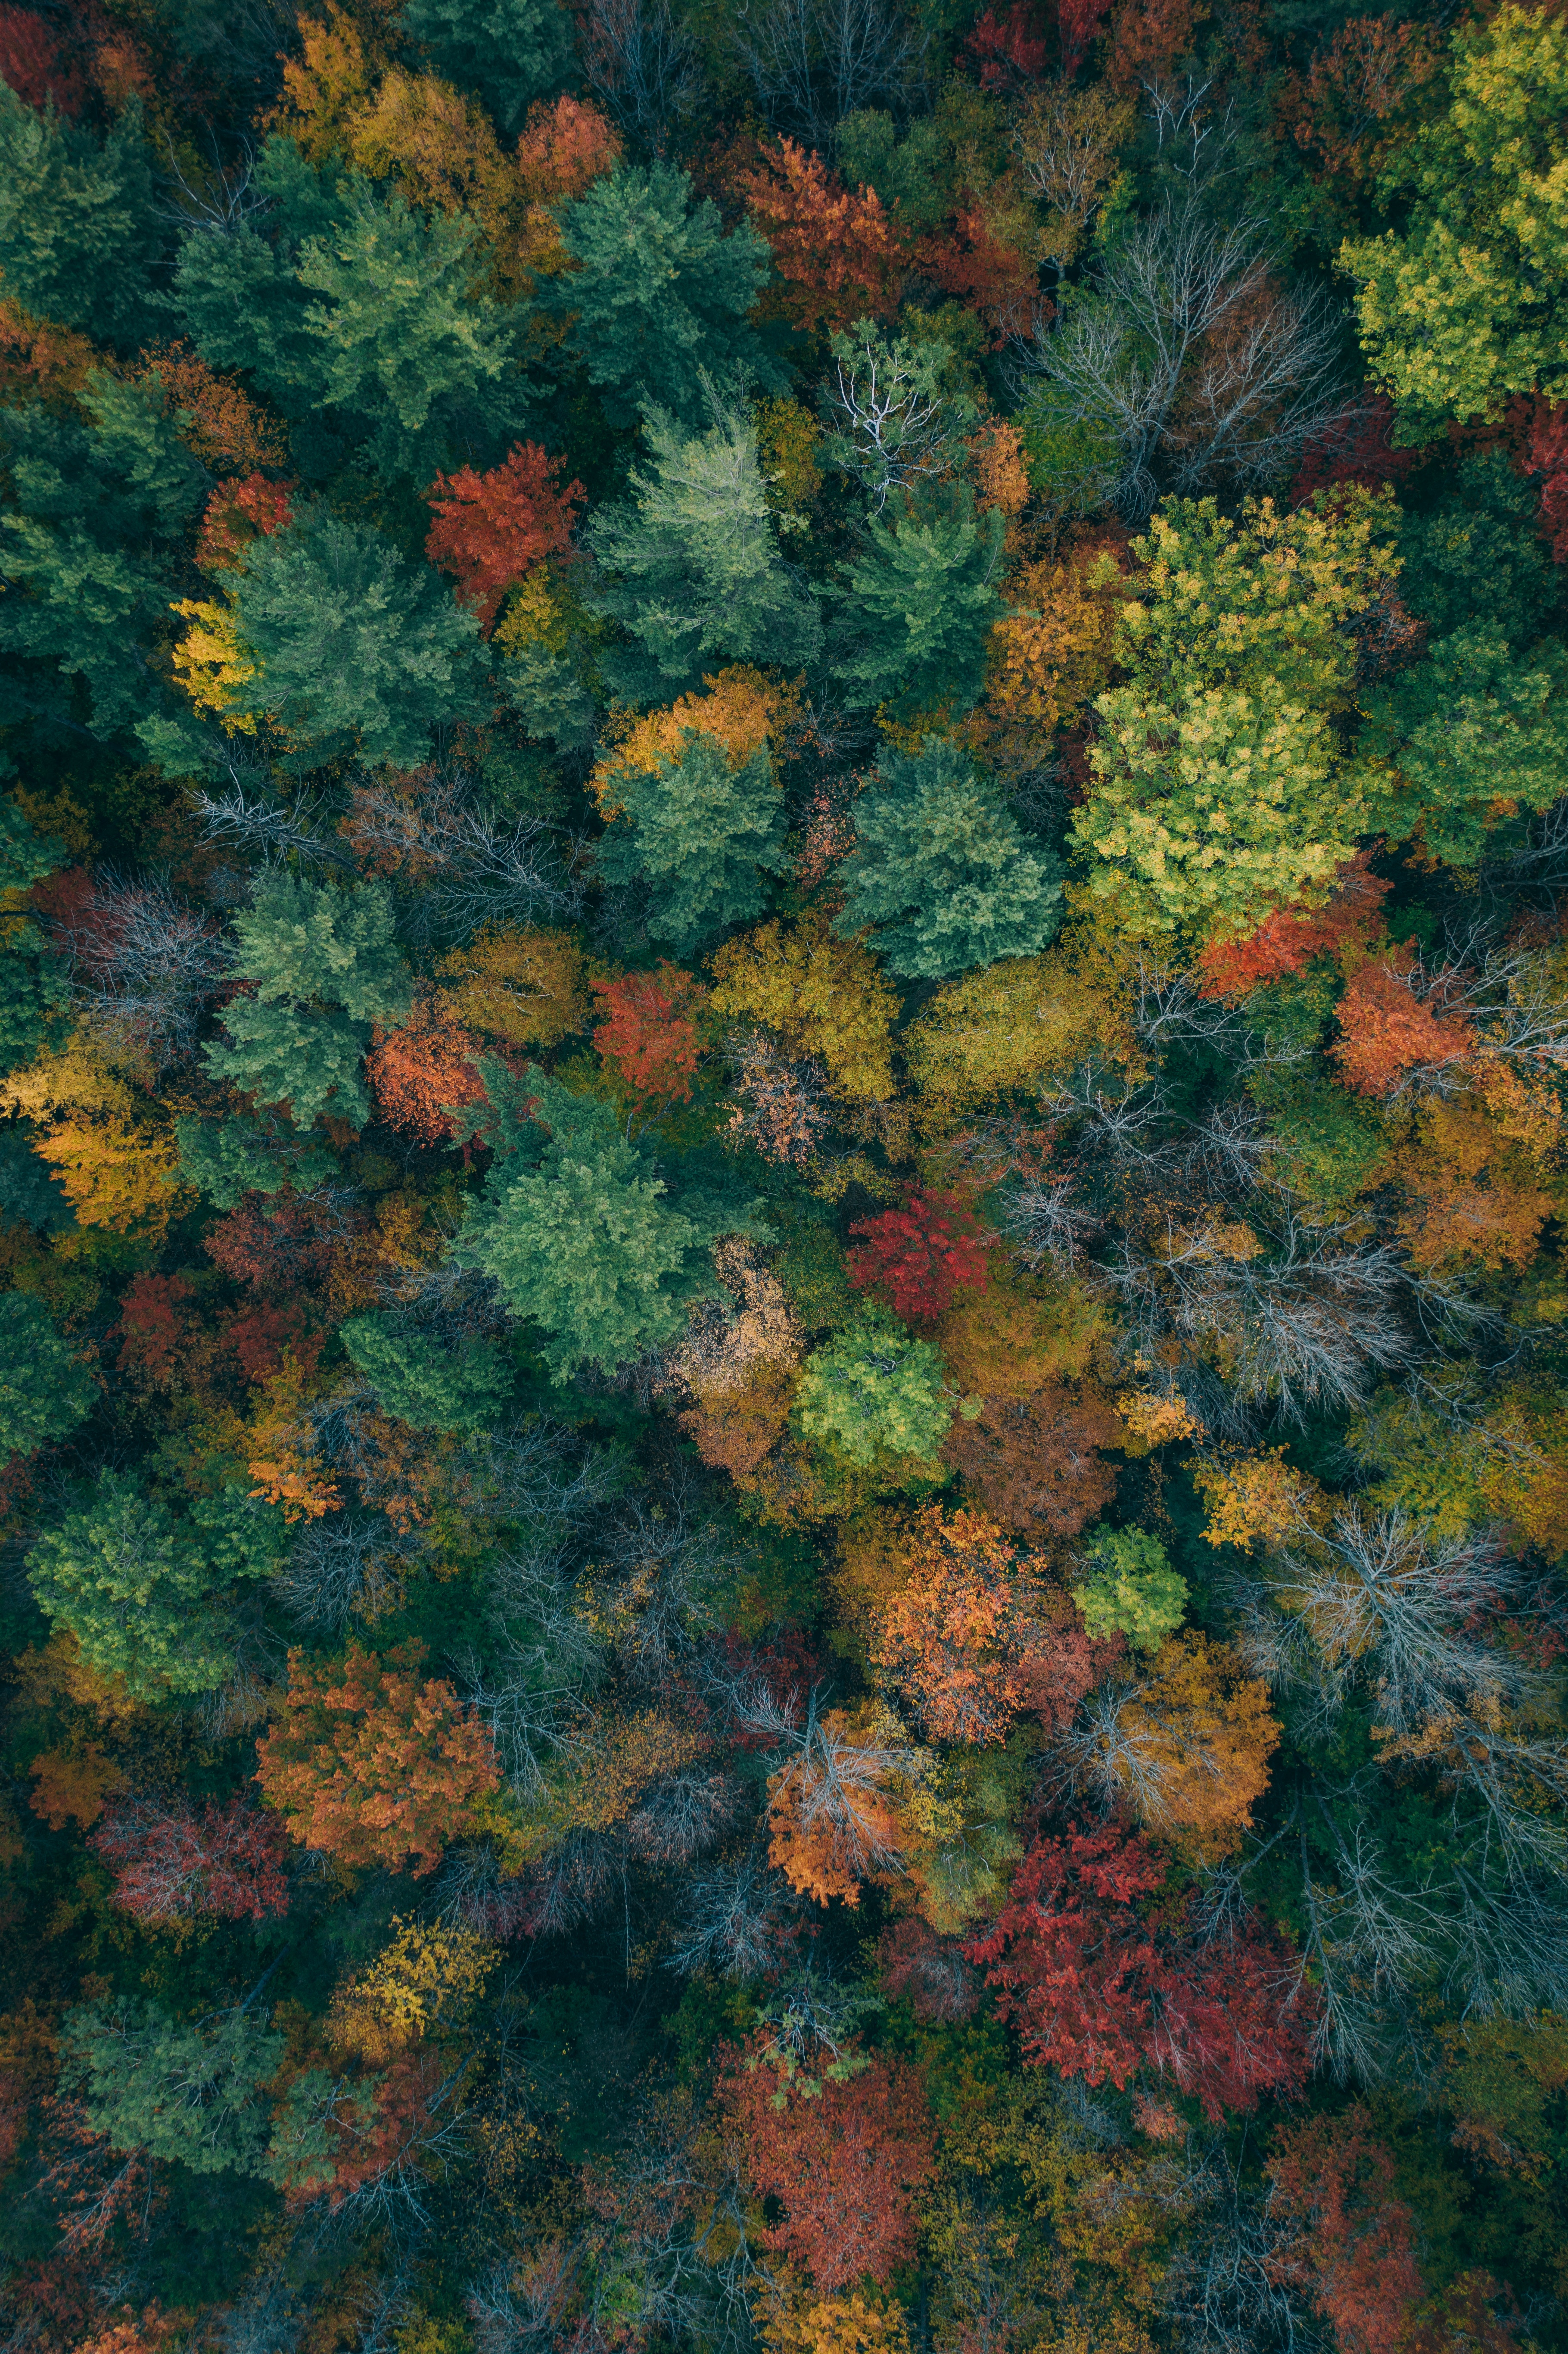 forest, colorful, nature, colourful, autumn colors, autumn paints, autumn, trees, view from above